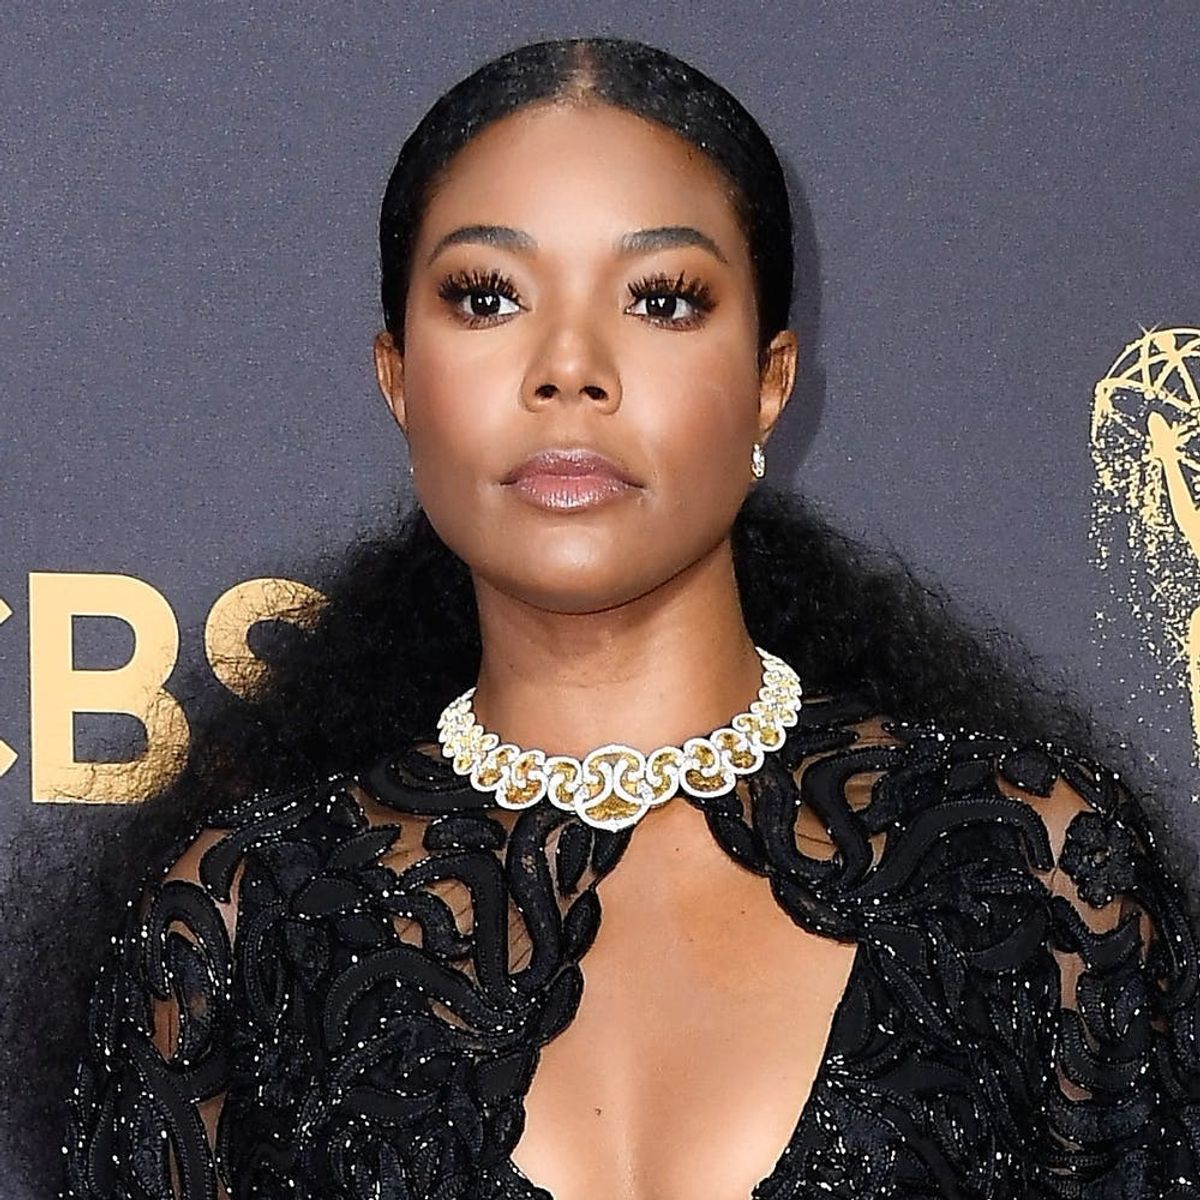 Gabrielle Union Opens Up About Fertility Struggles: “I Have Had 8 or 9 Miscarriages”